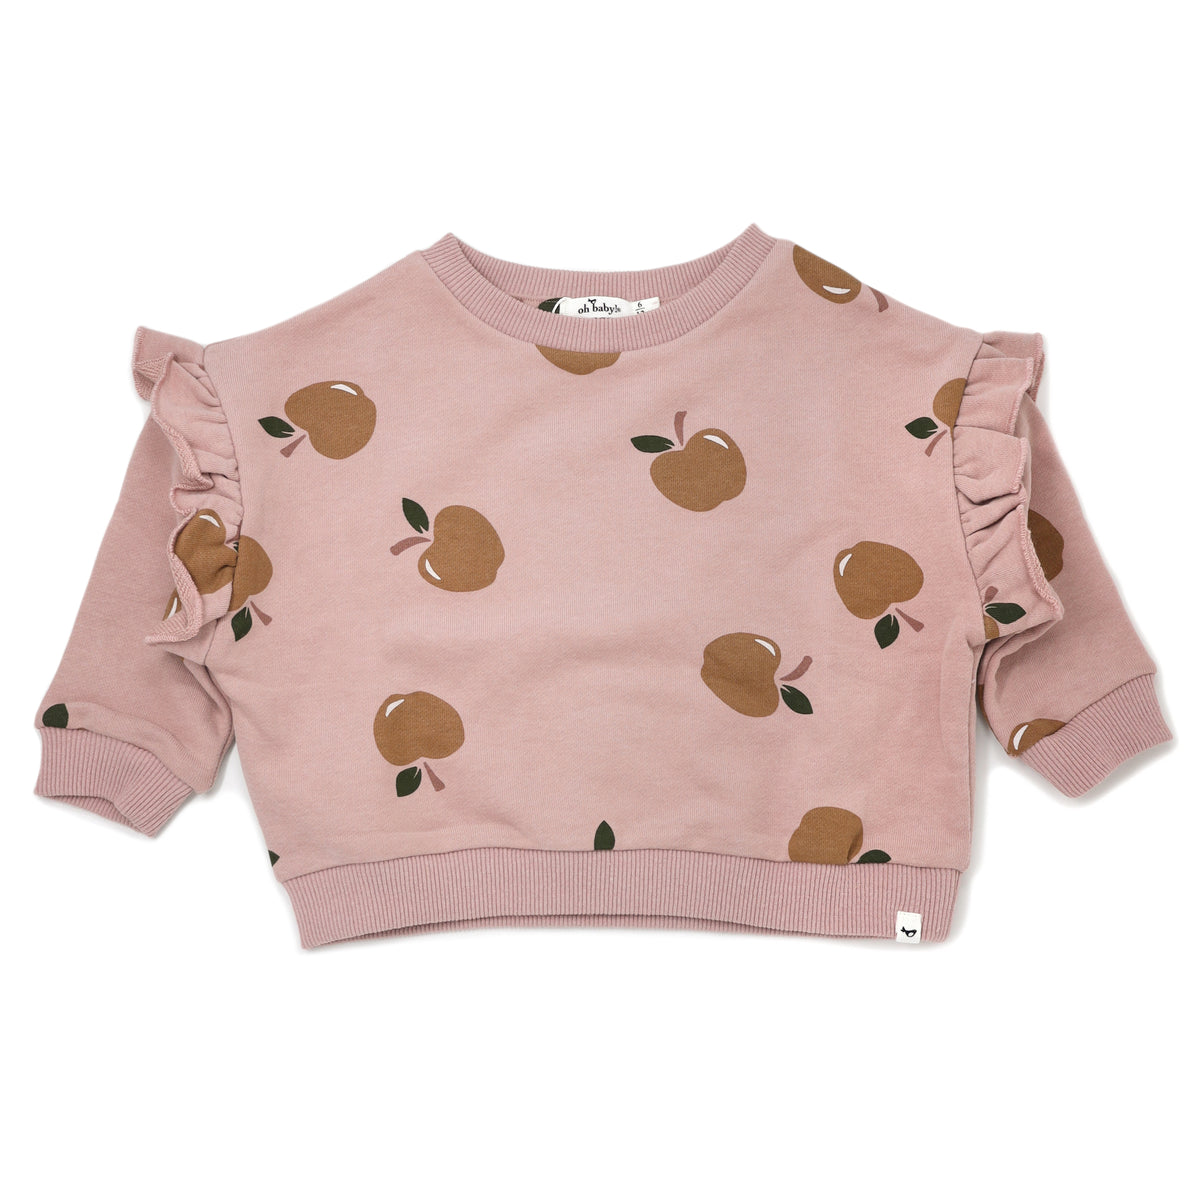 oh baby! Millie Slouch Sweatshirt with Rust Apples Print - Blush